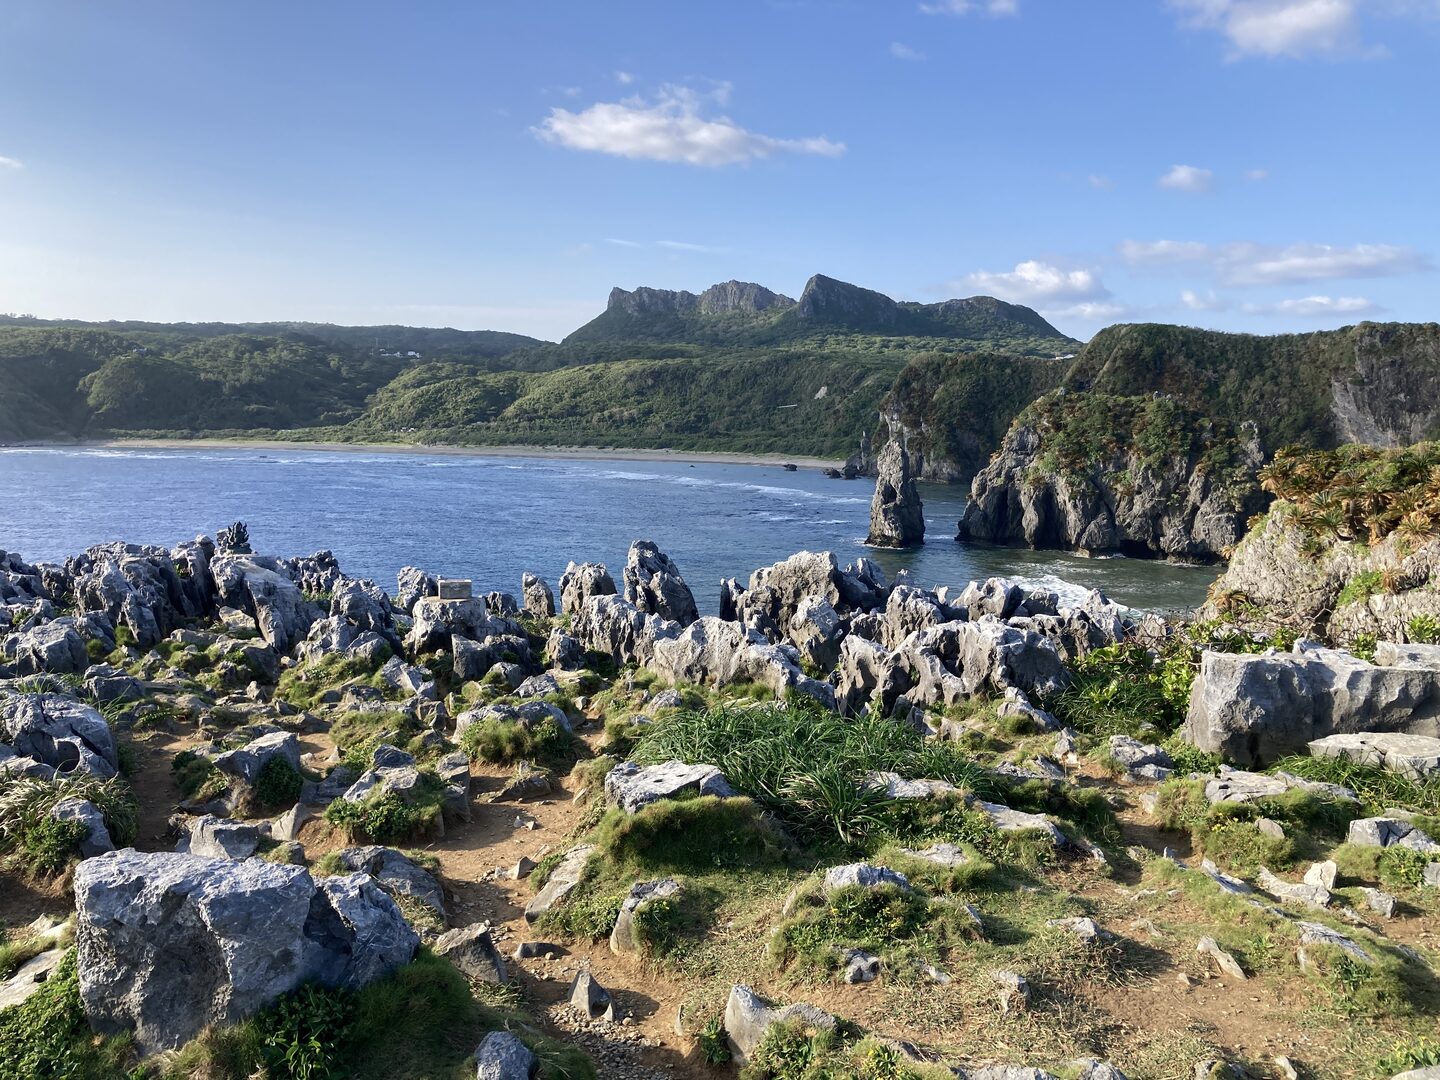 Daisekirinzan mountain seen from Cape Hedo with rock formations and bay in the foreground.